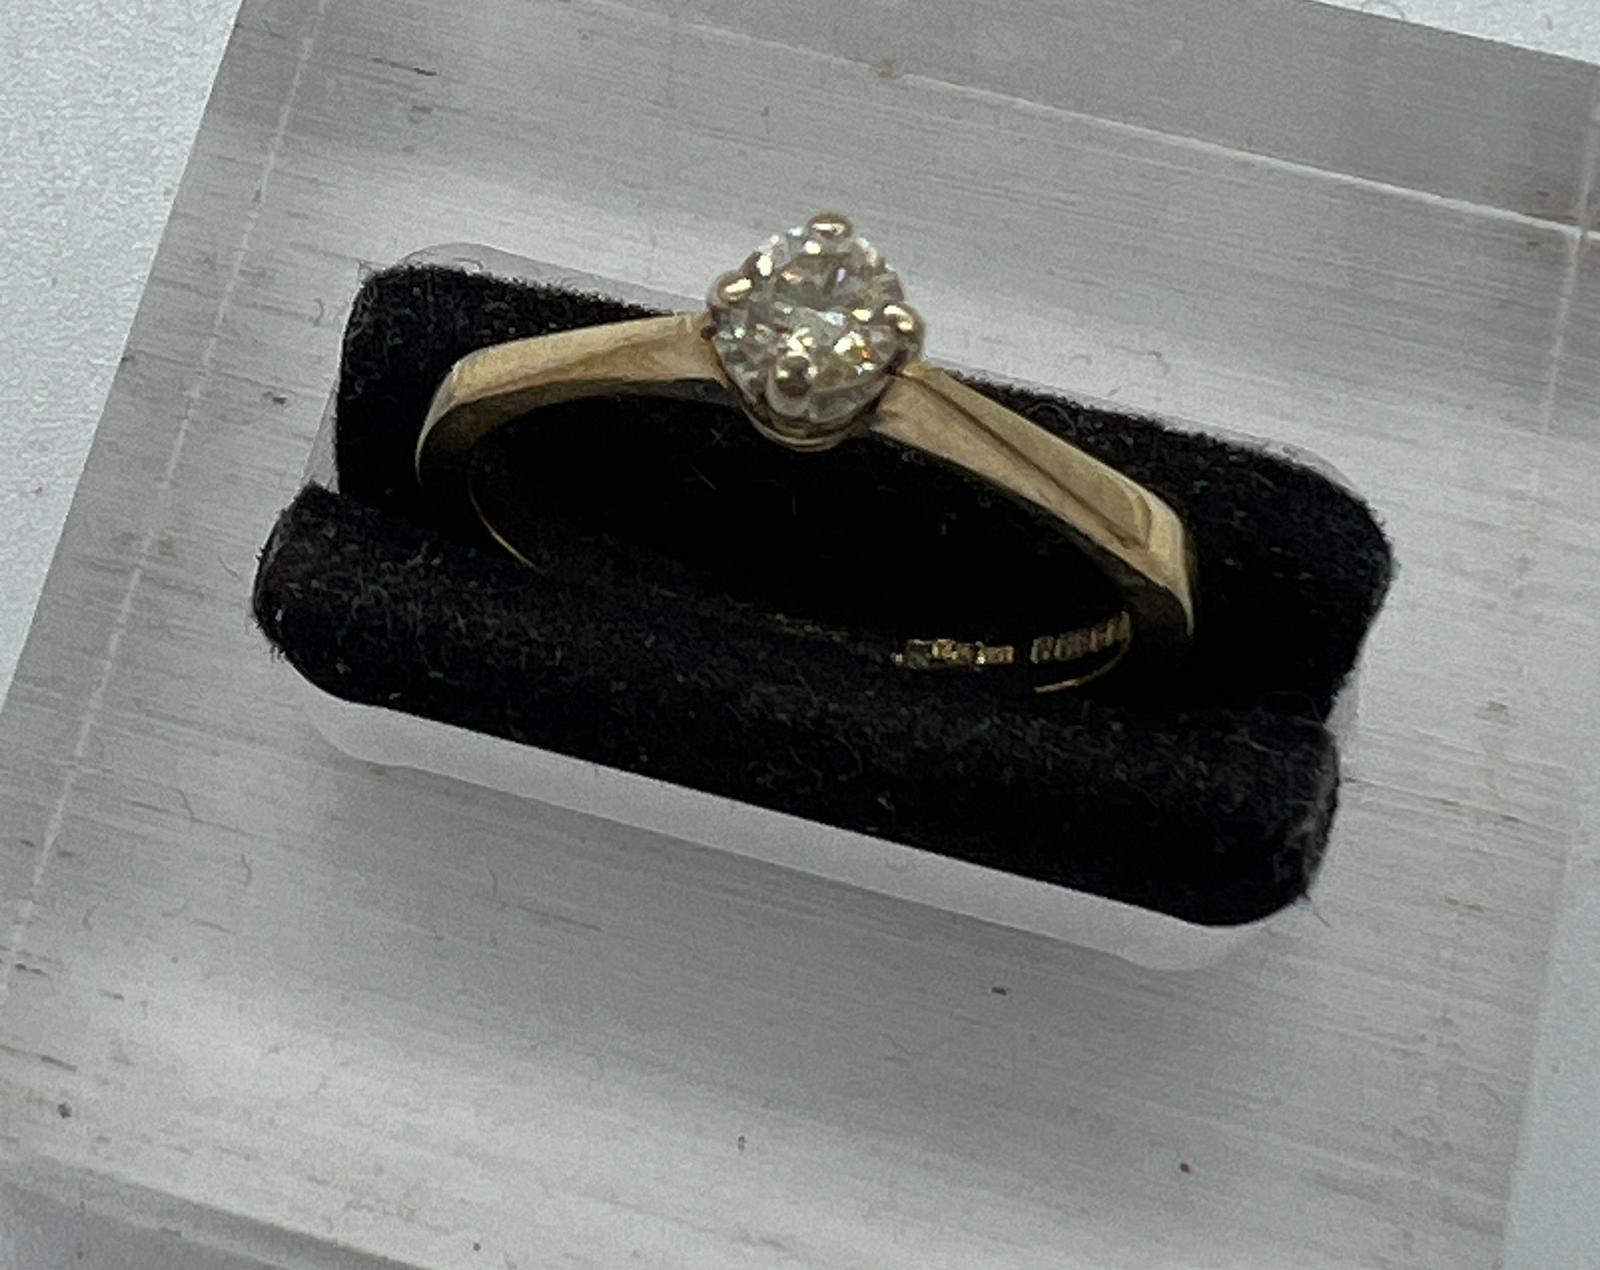 A 9ct gold diamond ring, approximate size N, (2.6g)